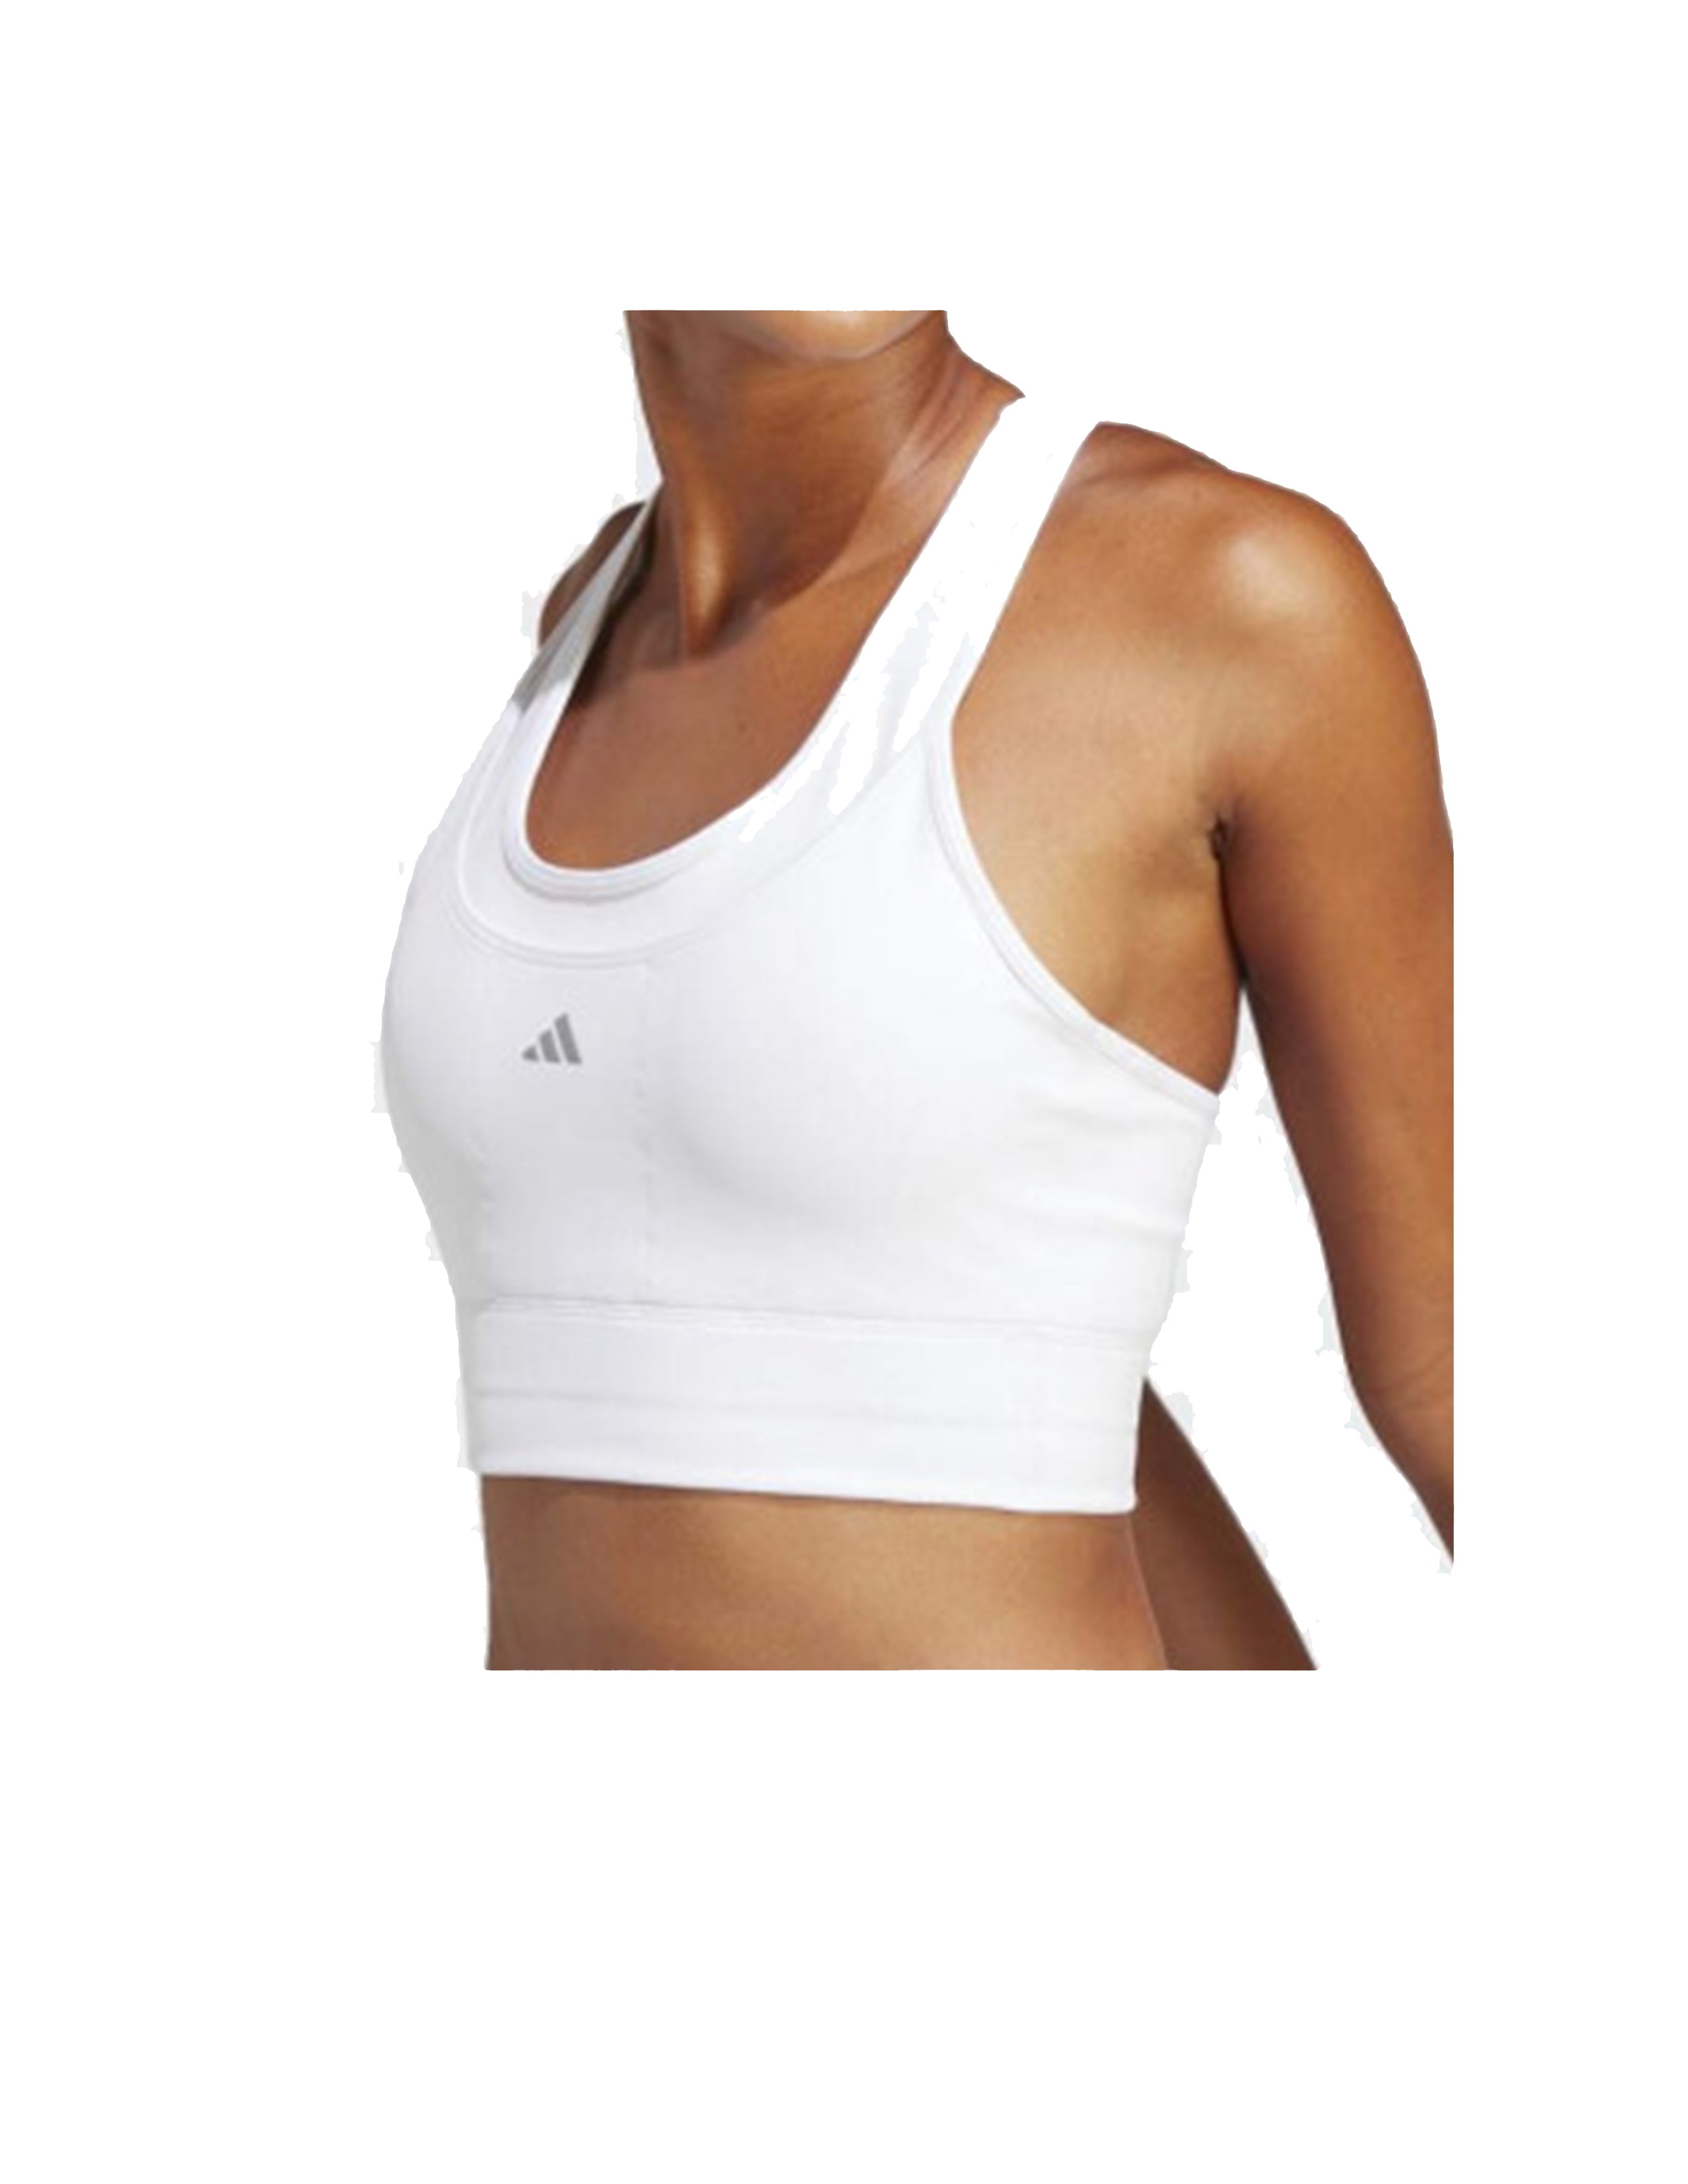 Stay supported and stylish with the Adidas Techfit Racerback